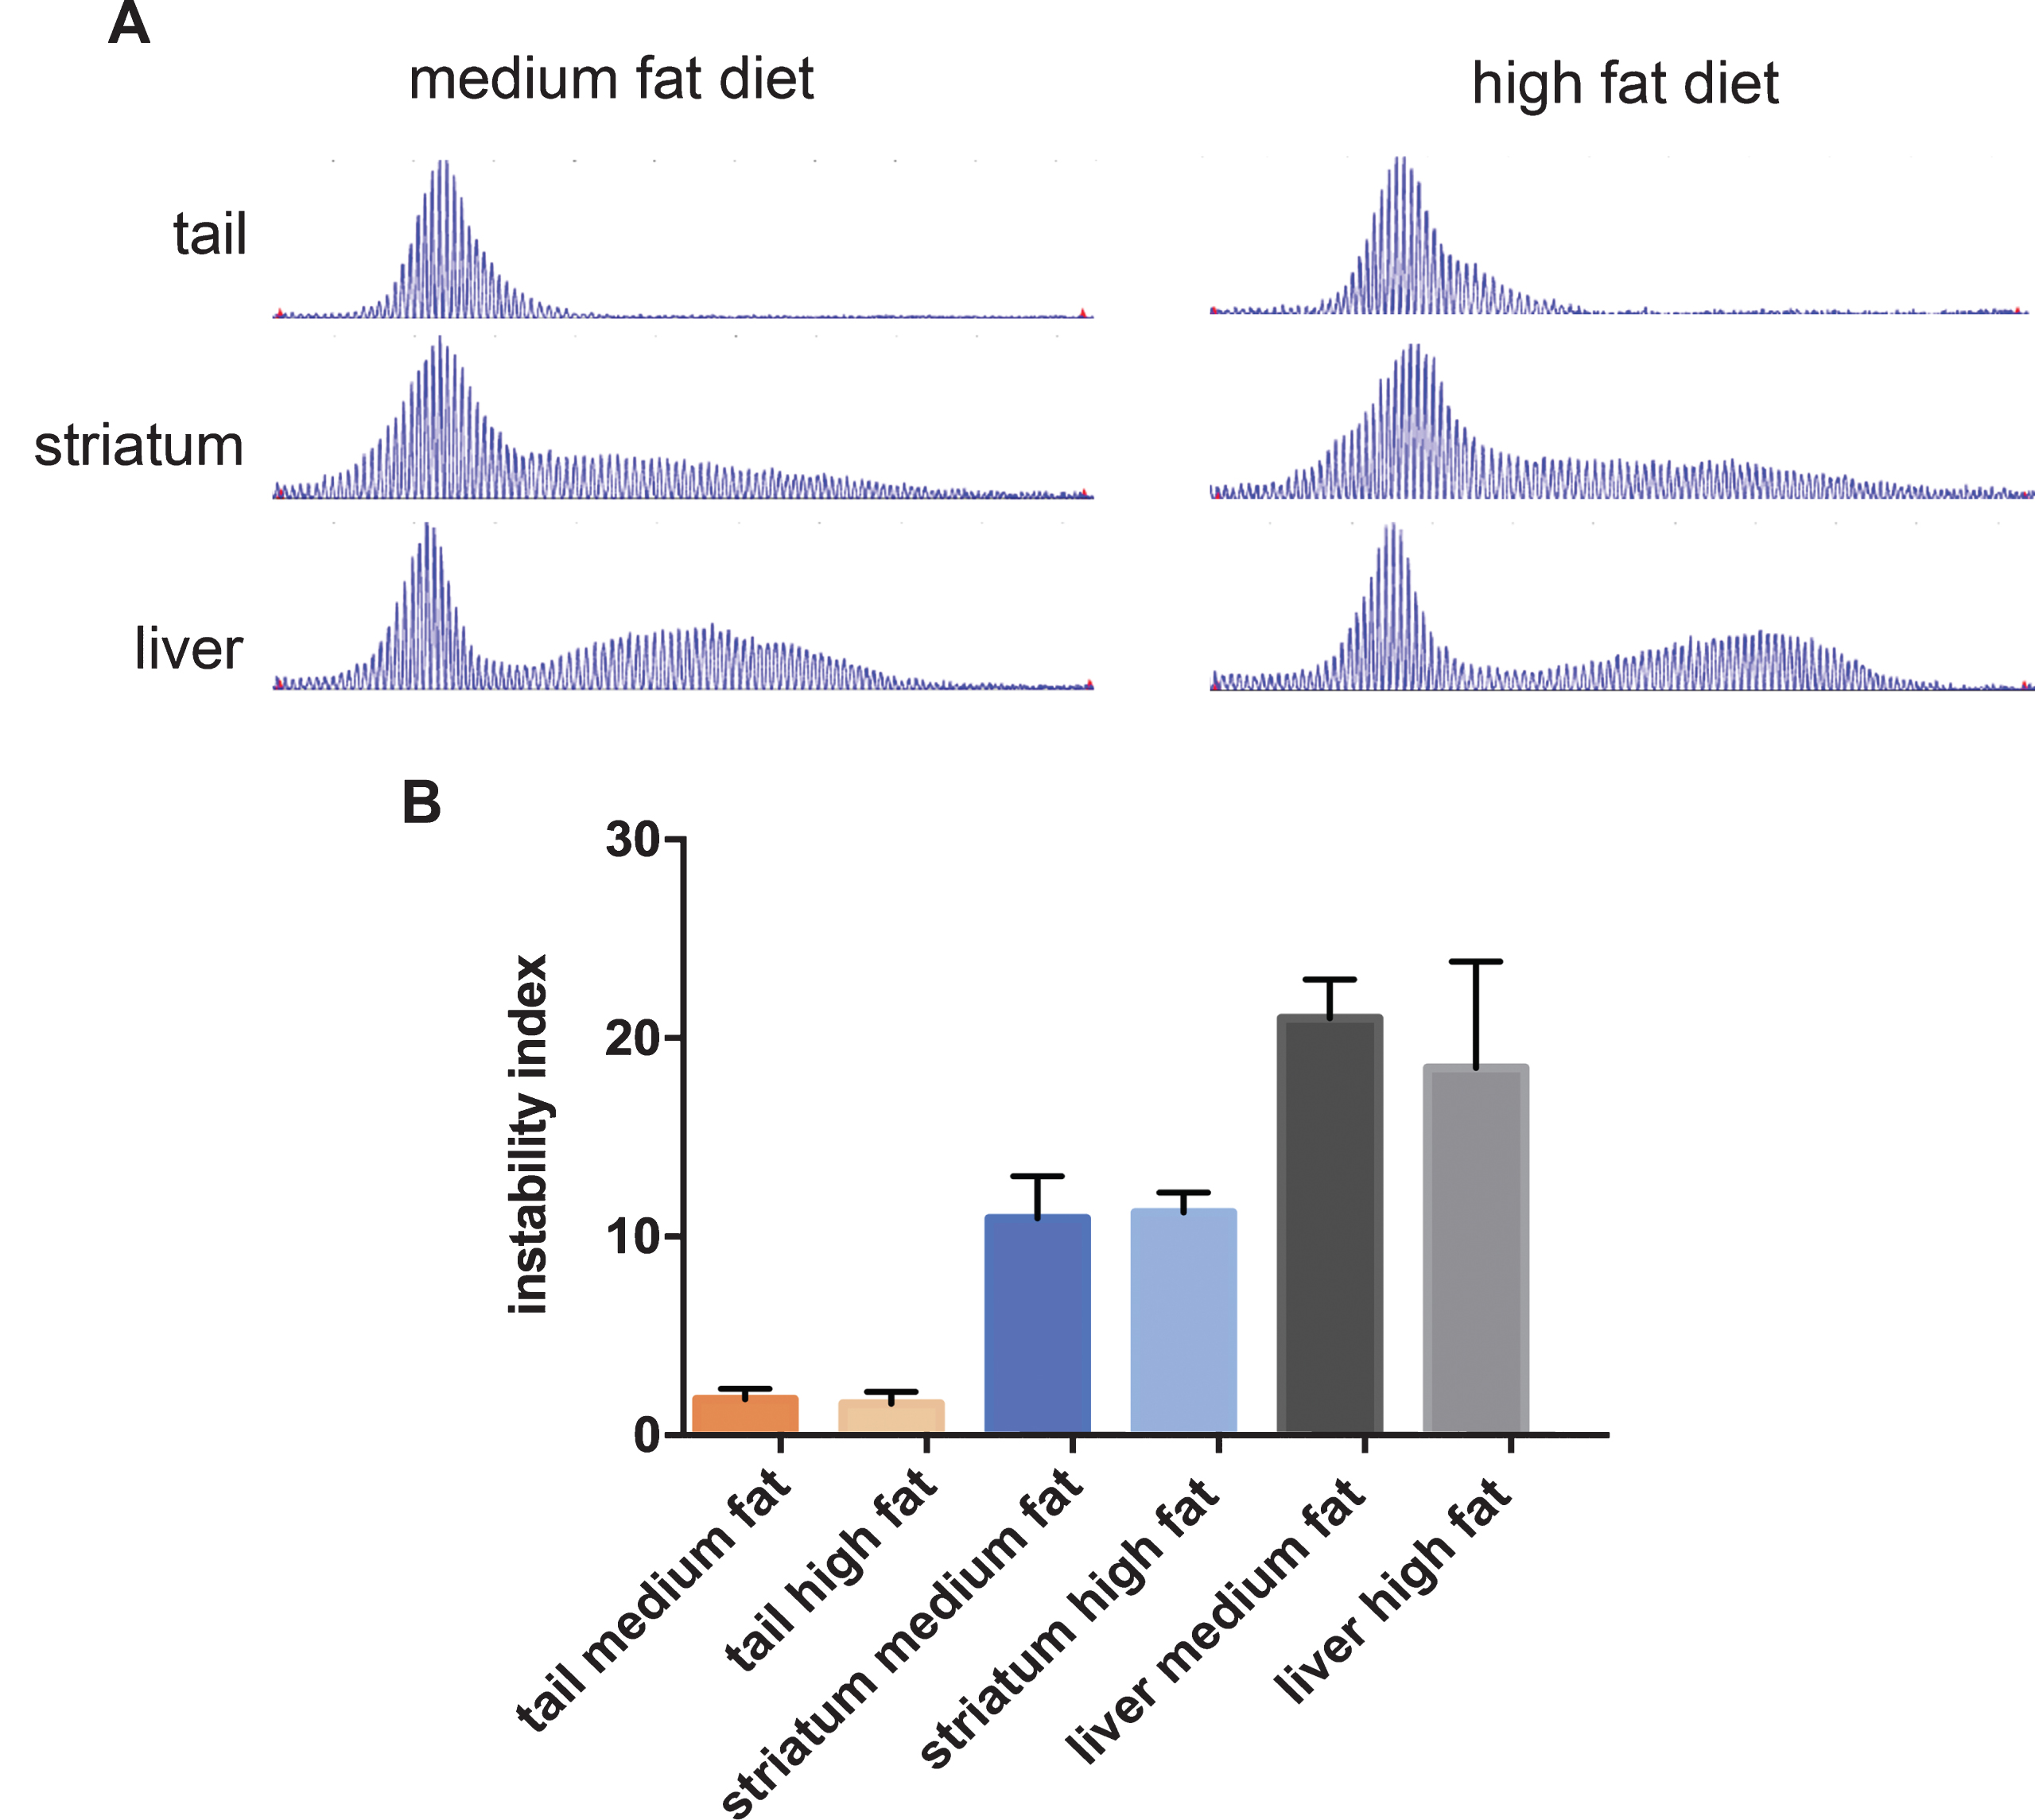 The effect of diet on CAG instability in tissues from HttQ111 mice. A. Representative GeneMapper traces of HttQ111 CAG repeats from tail, striatum and liver of an HttQ111/+ mouse on a medium fat or high fat diet at 10 months of age. B. Instability indices were calculated from the GeneMapper traces from tissues of 5 medium fat-fed HttQ111/+ mice (CAGs: 127, 127, 129, 131, 133) and 4 high fat-fed HttQ111/+ mice (CAGs: 129, 129, 130, 132). Bars represent mean+/-SD.